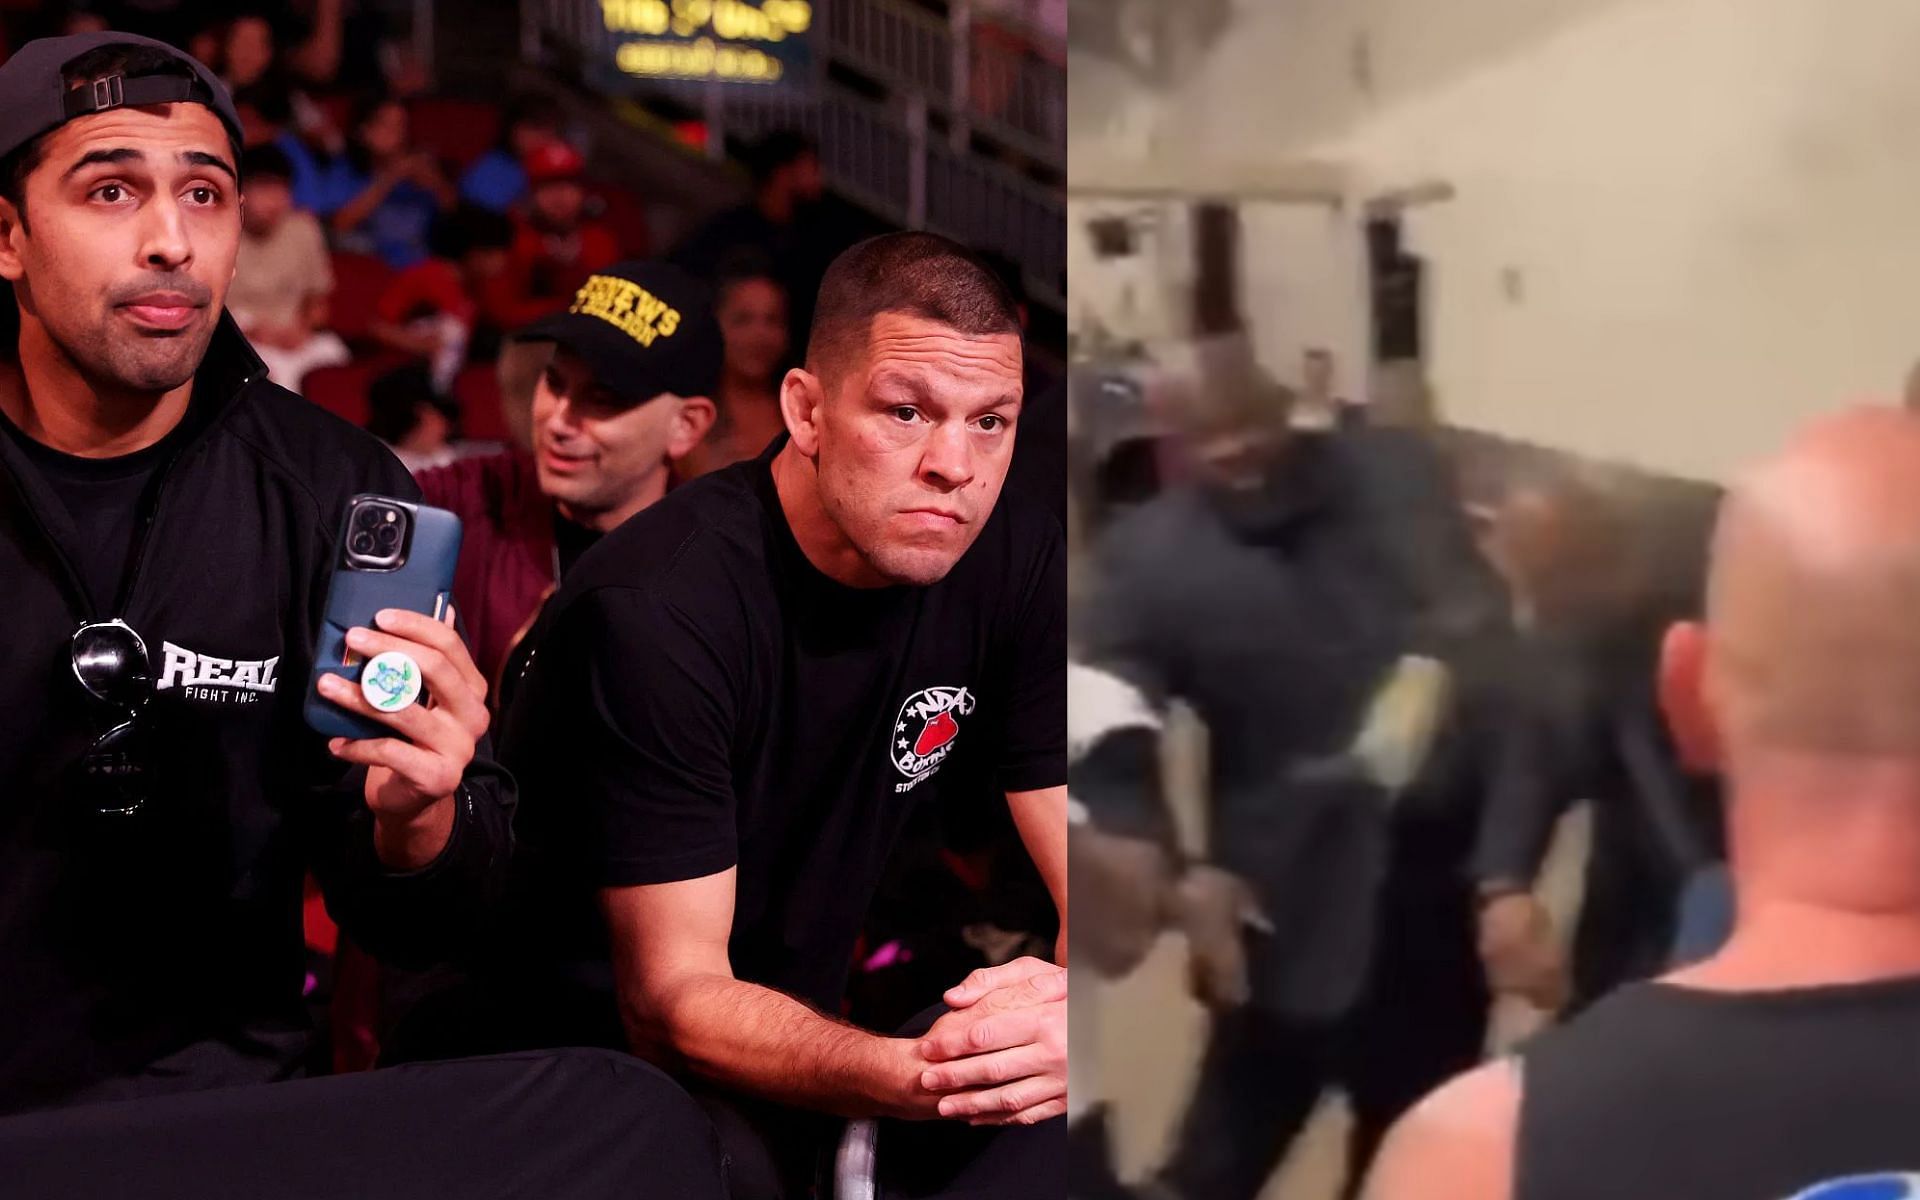 VIDEO: New close-up angle of Nate Diaz’s team throwing a drink at a bodyguard during Jake Paul vs. Anderson Silva backstage brawl